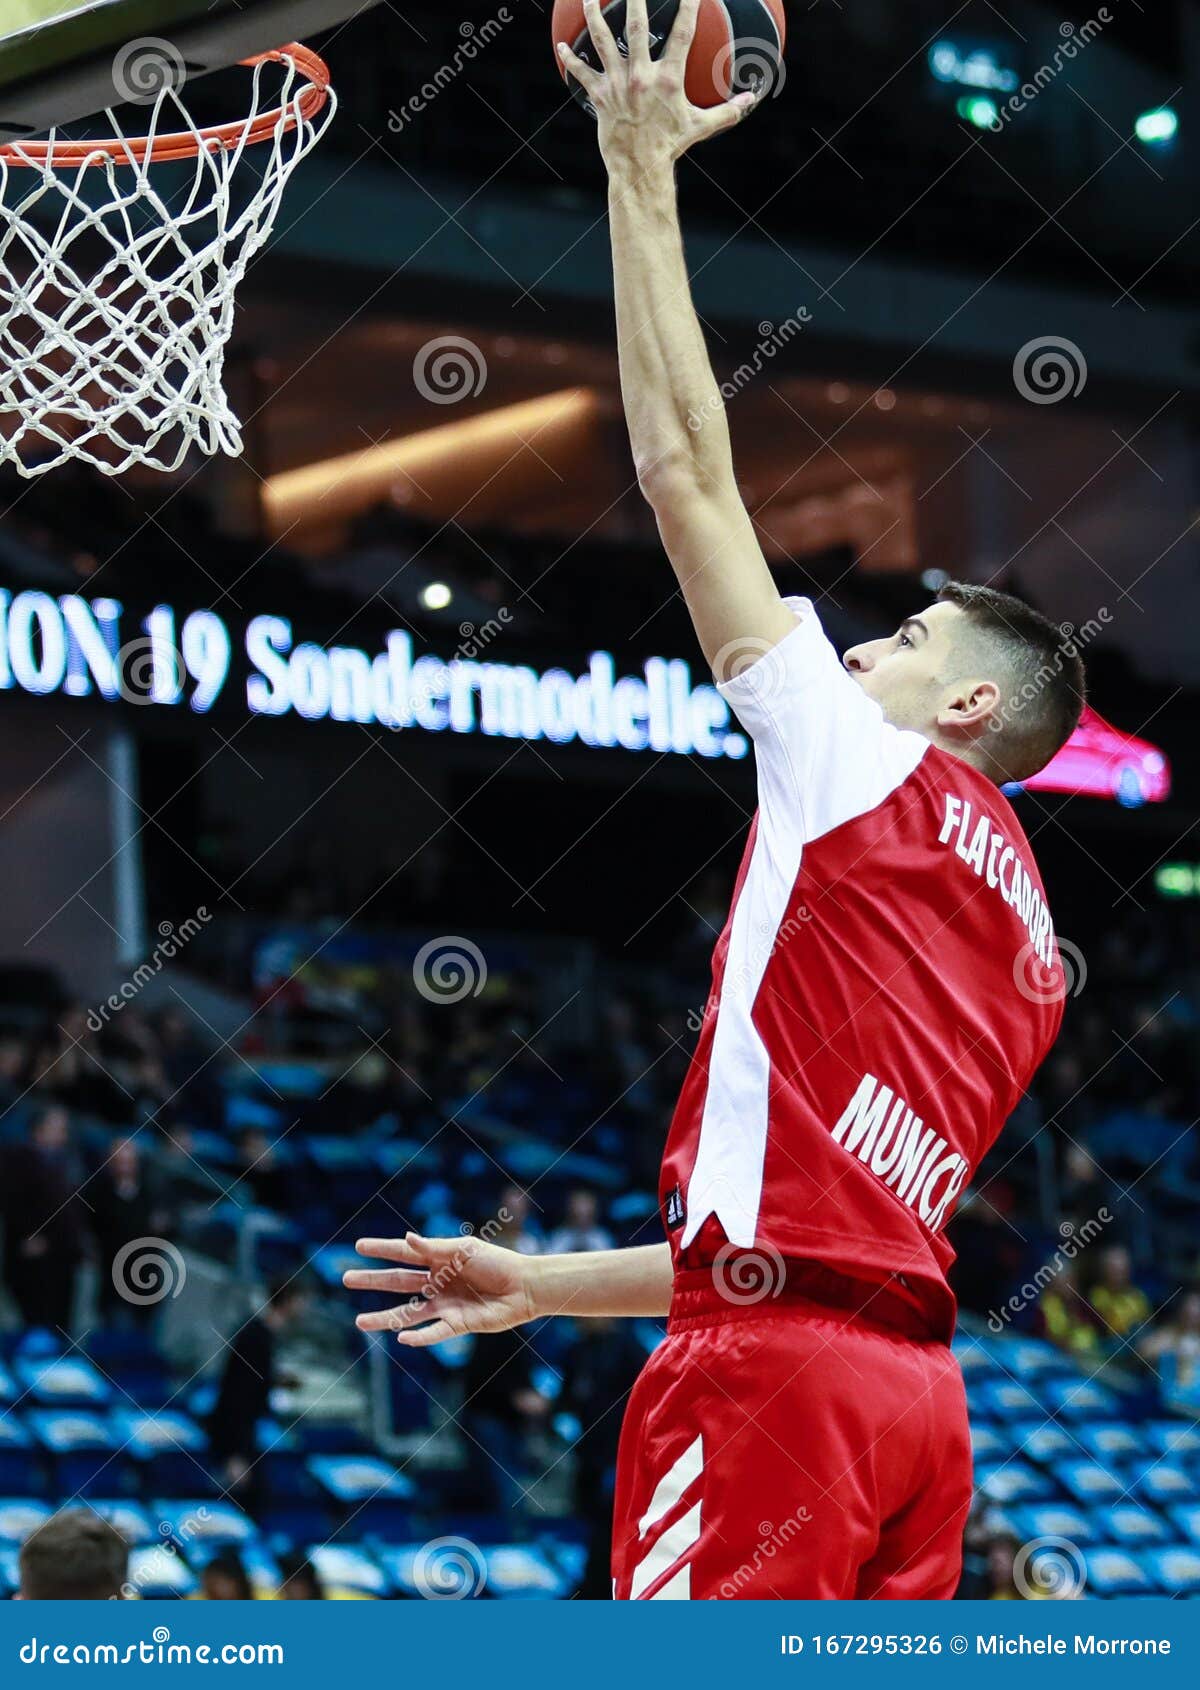 Basketball Player Of Fc Bayern Munich In Action During The Warmup Session Before The Euroleague Basketball Match Editorial Photo Image Of Basketball Germany 167295326